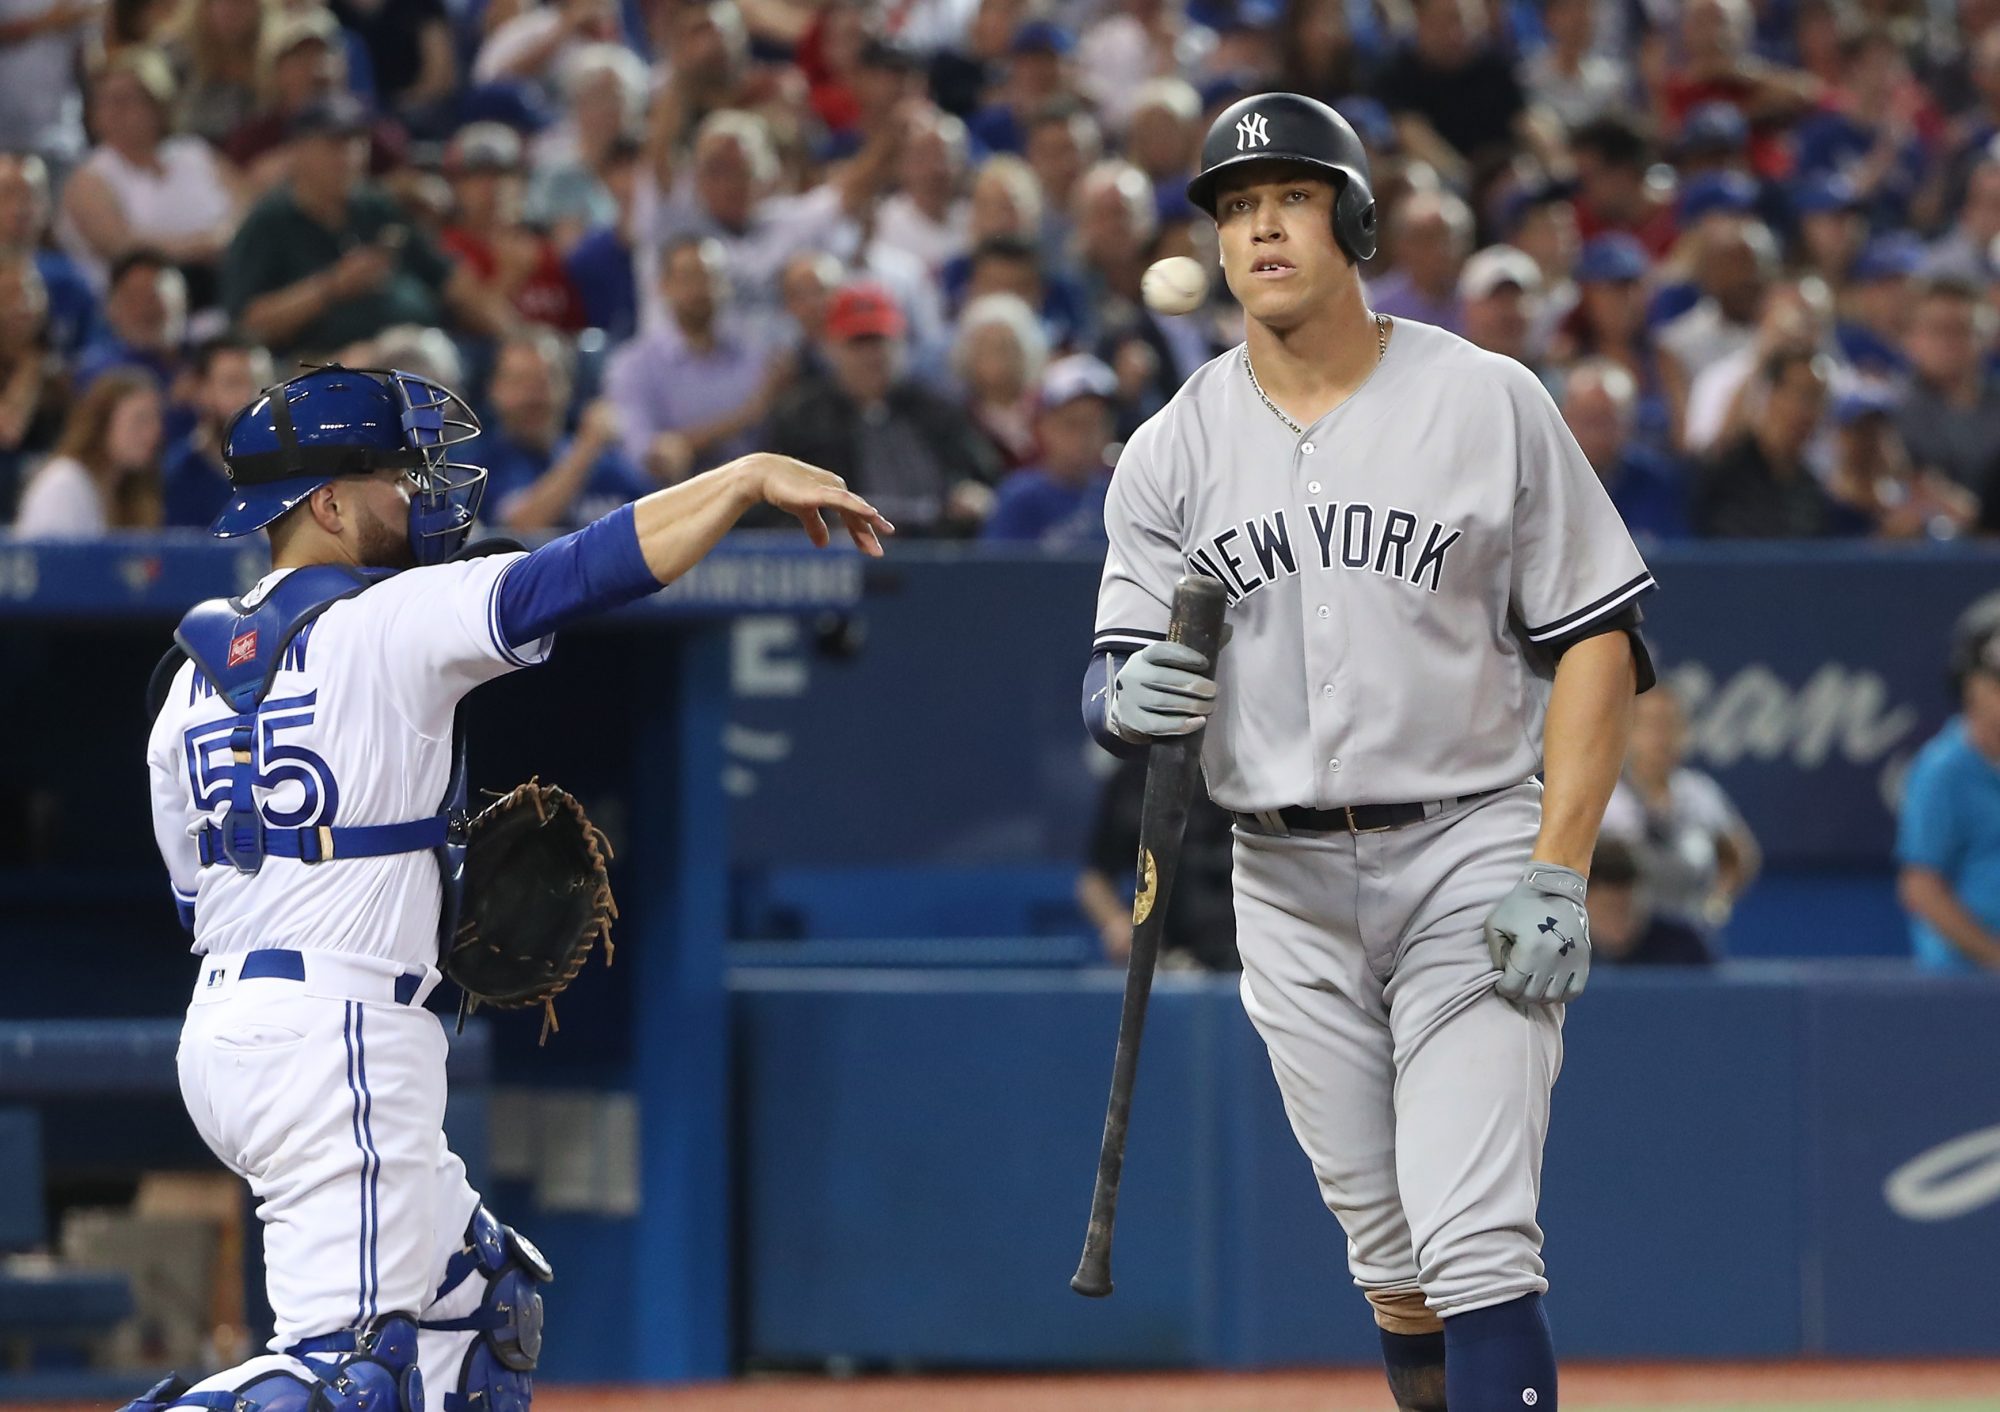 Marco Estrada, Toronto Blue Jays Take Series By Shutting Out the New York Yankees (Highlights) 